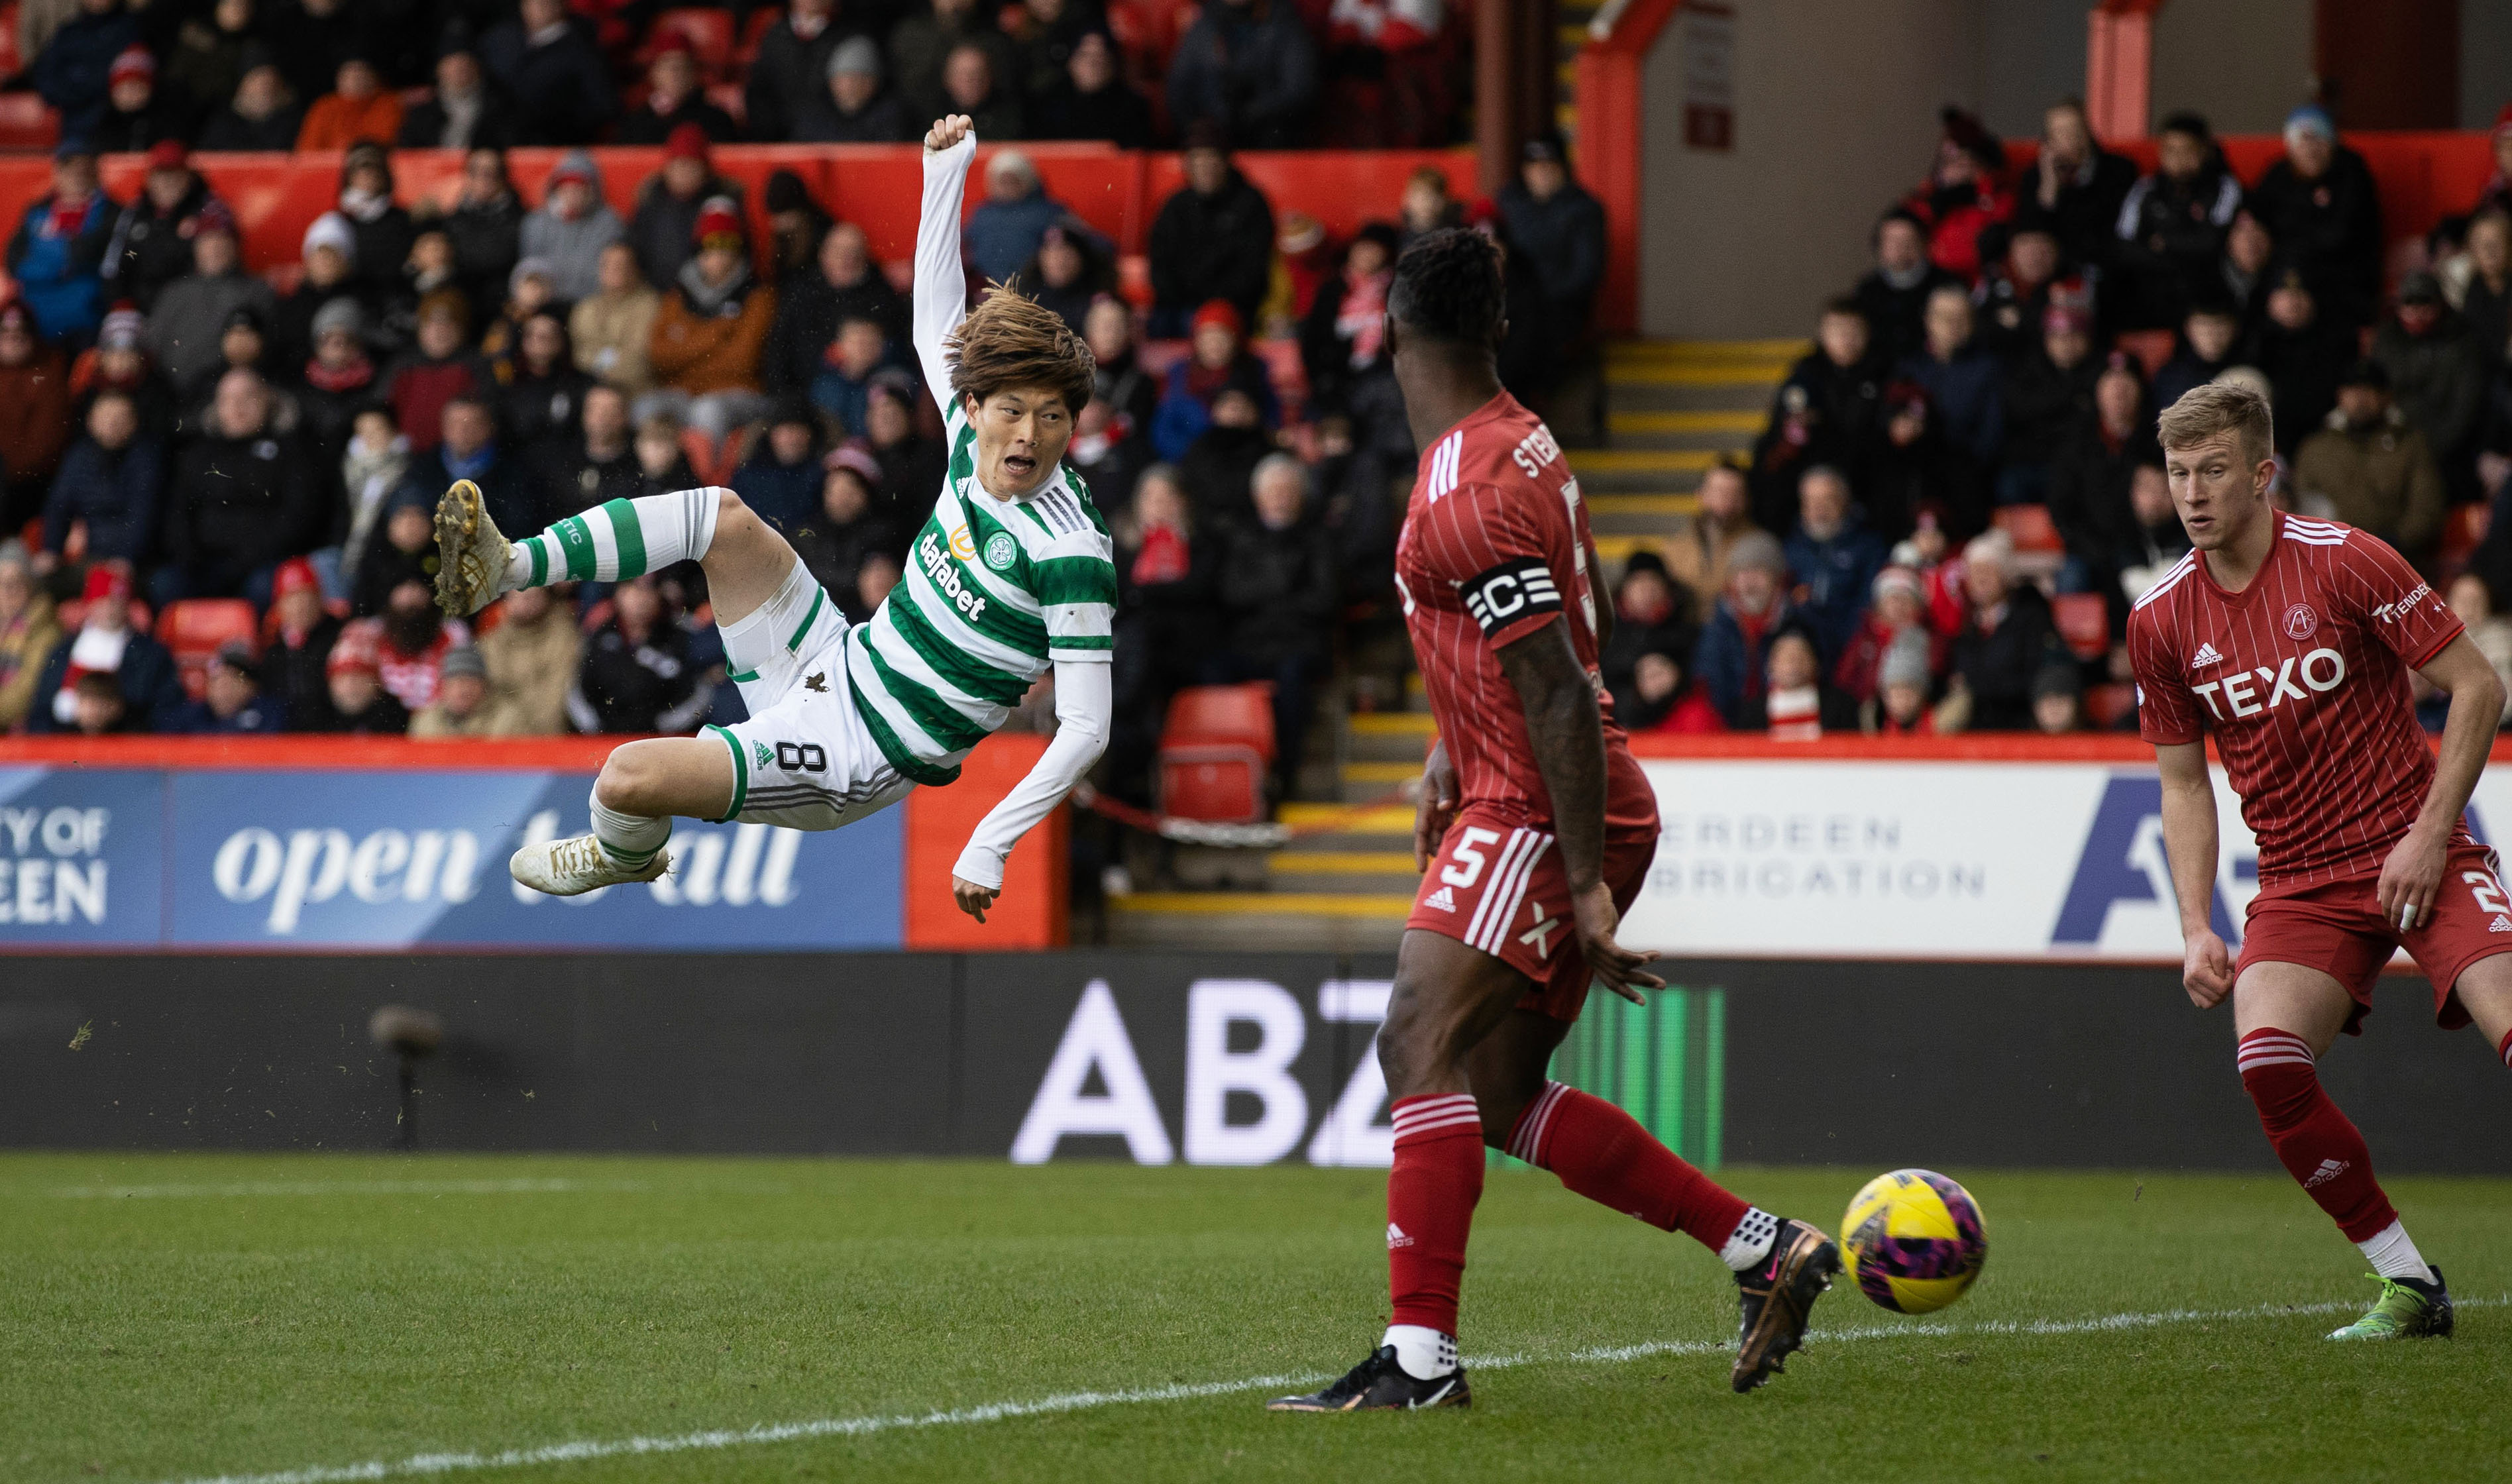 Kyogo Furuhashi came close with acrobatic effort as Celtic piled on the pressure.